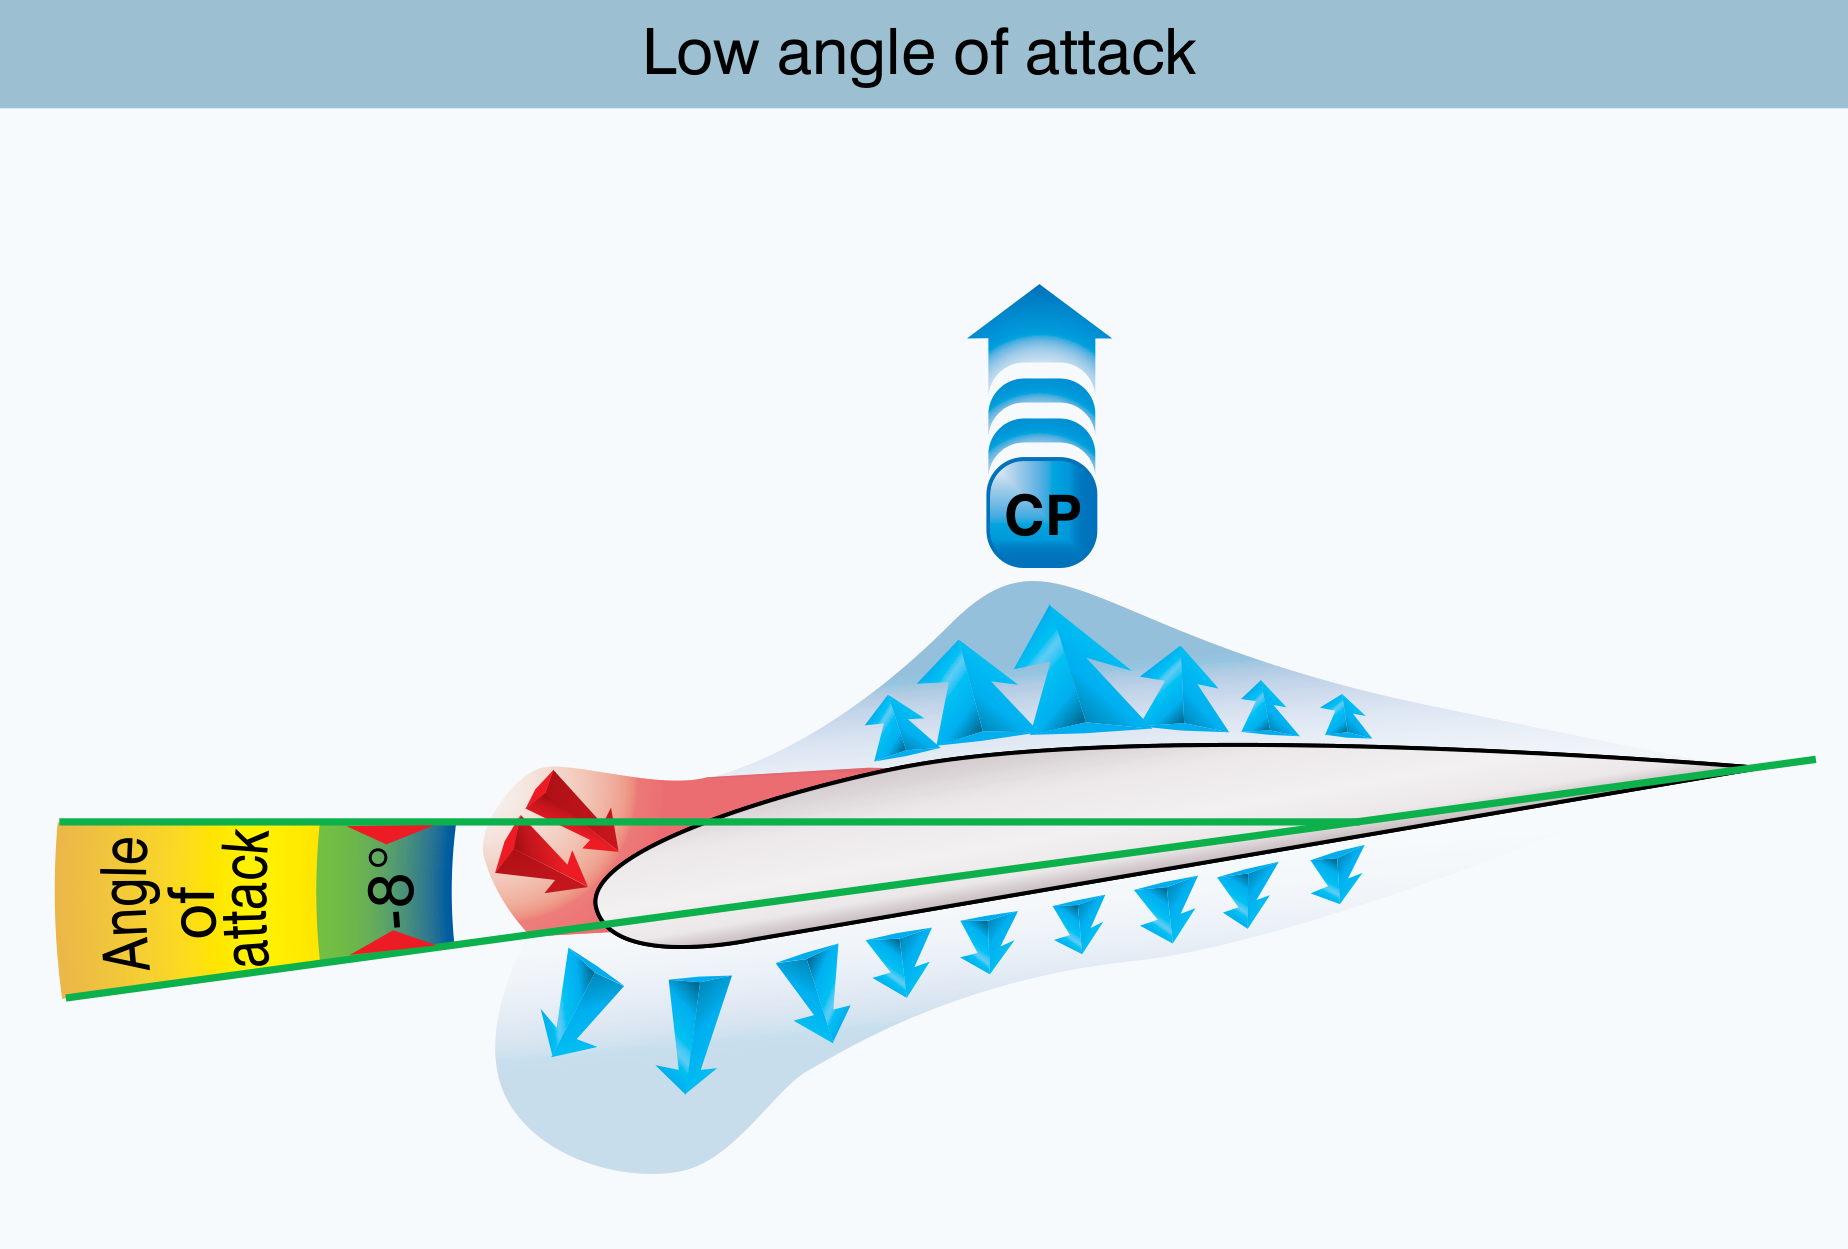 Airfoil pressure distribution at low angles of attack.